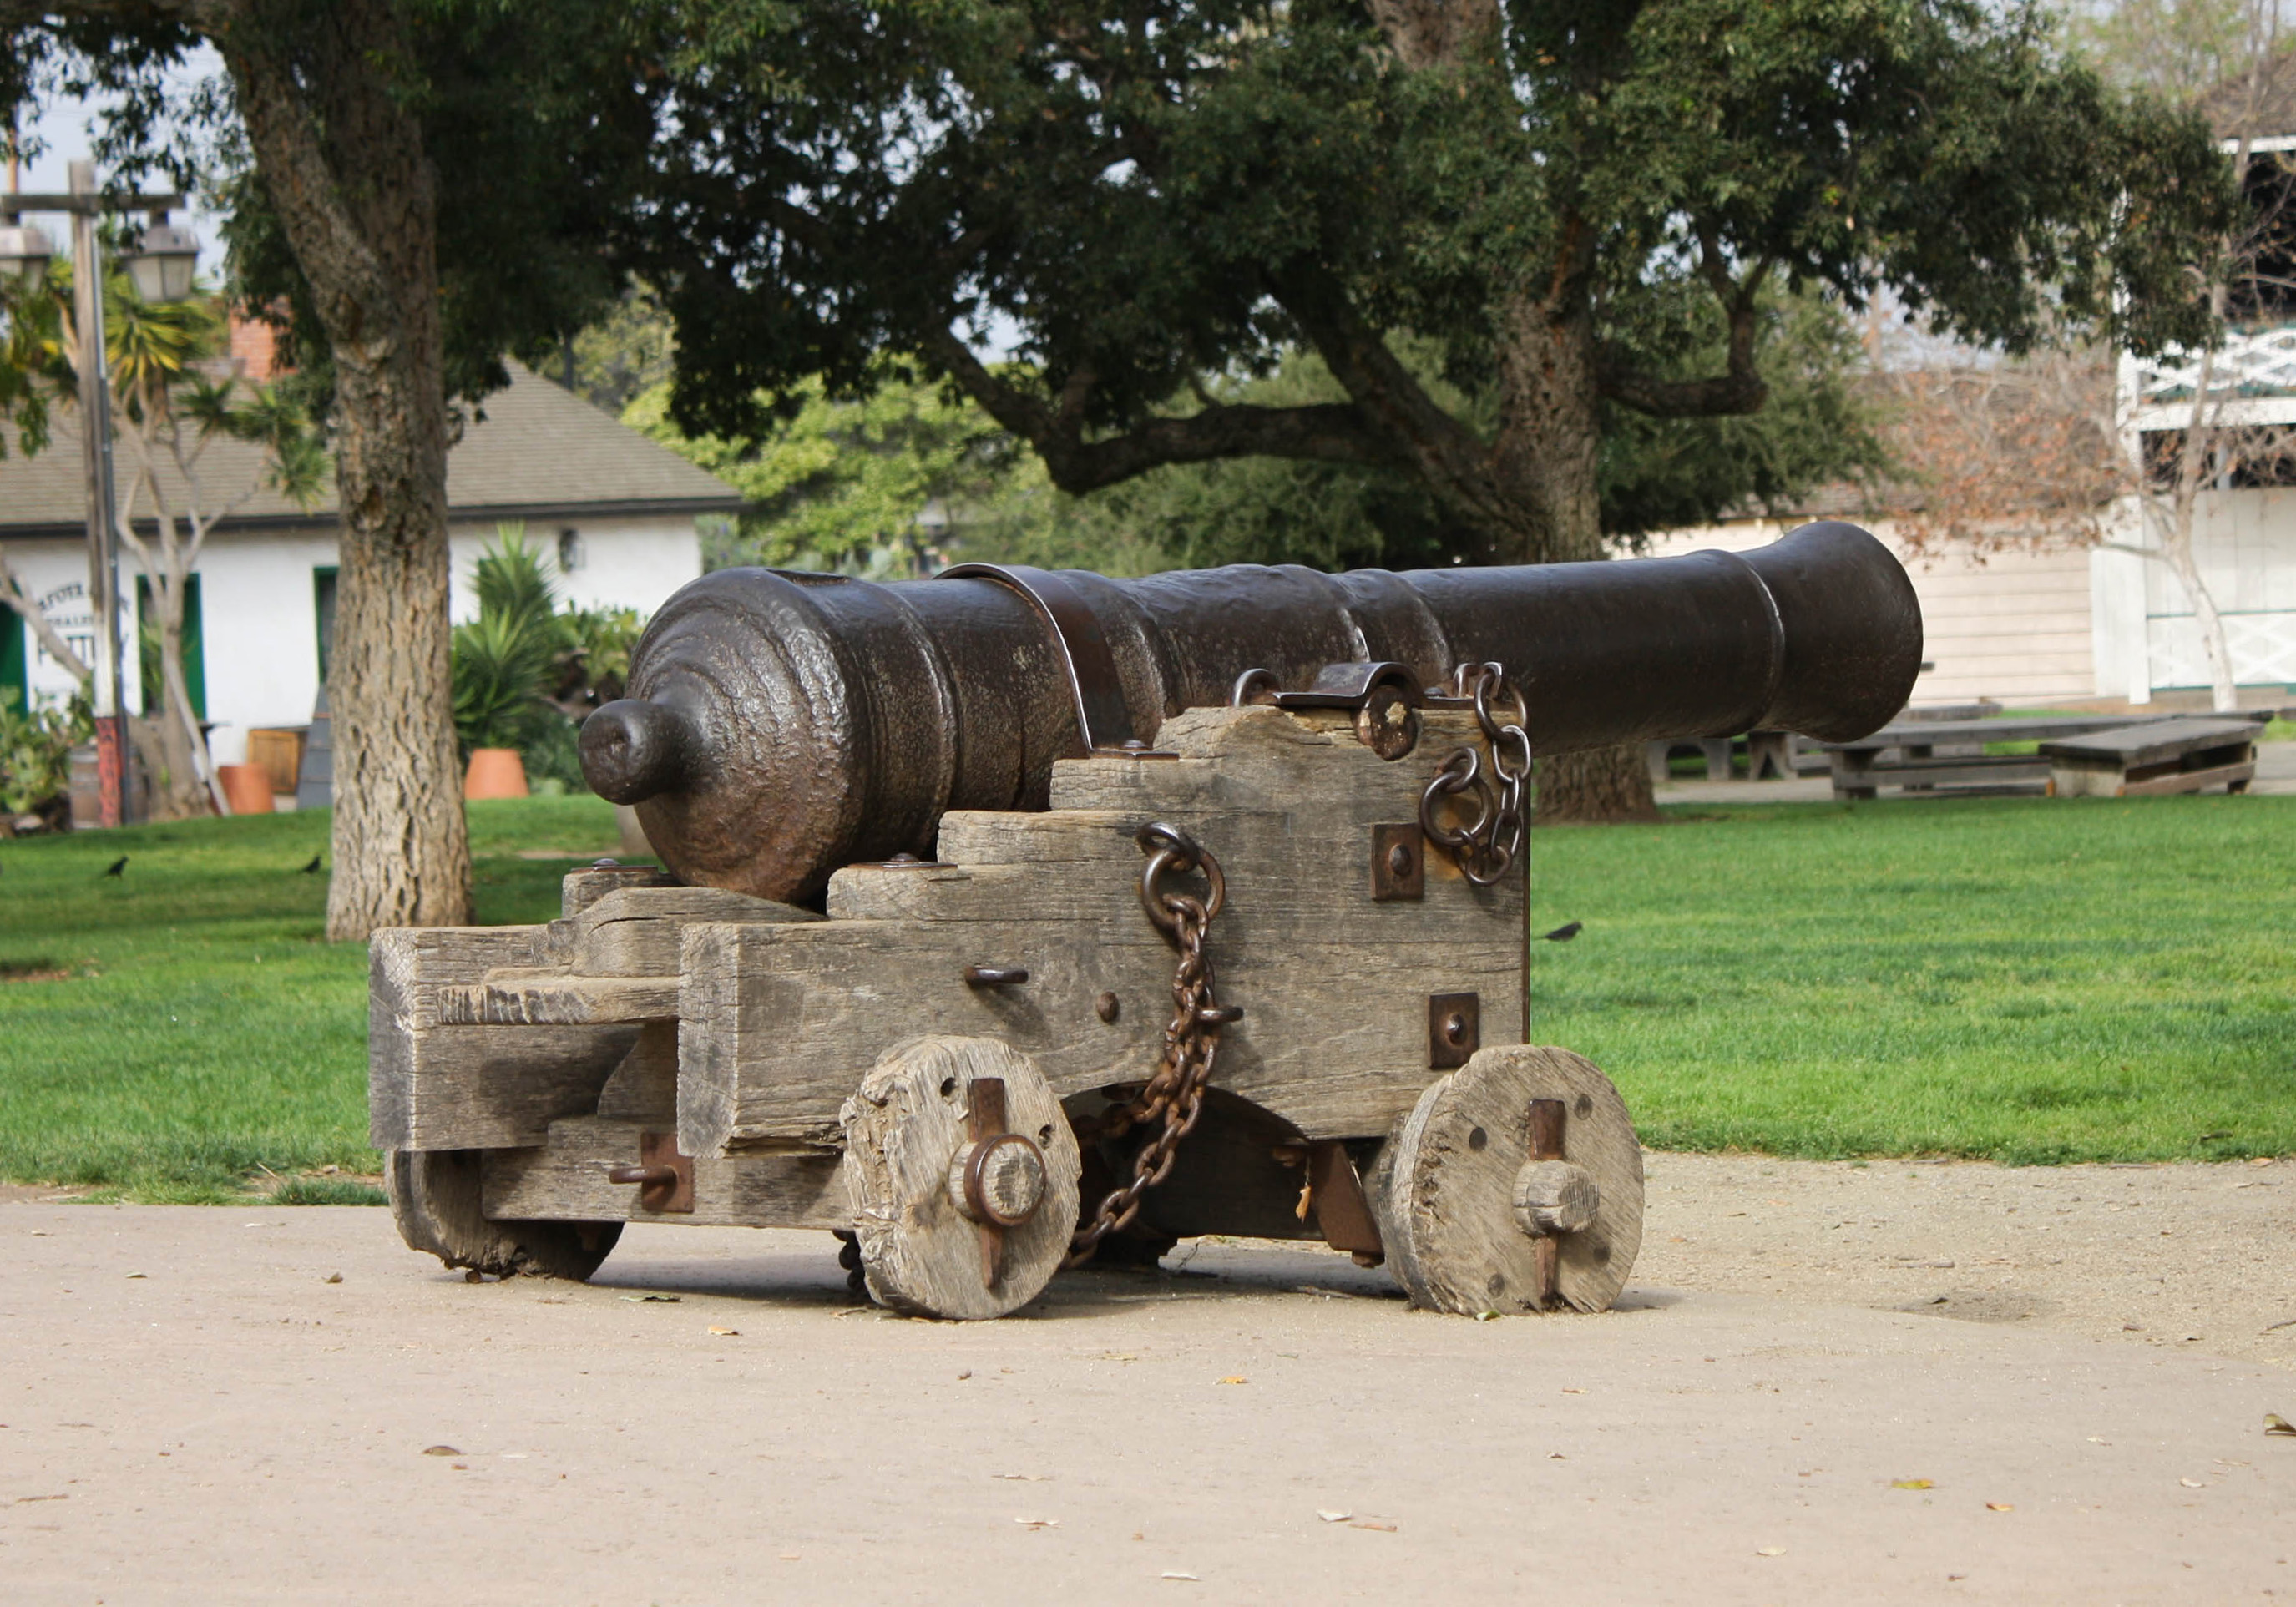 File:Cannon in Old Town Plaza.jpg - Wikimedia Commons